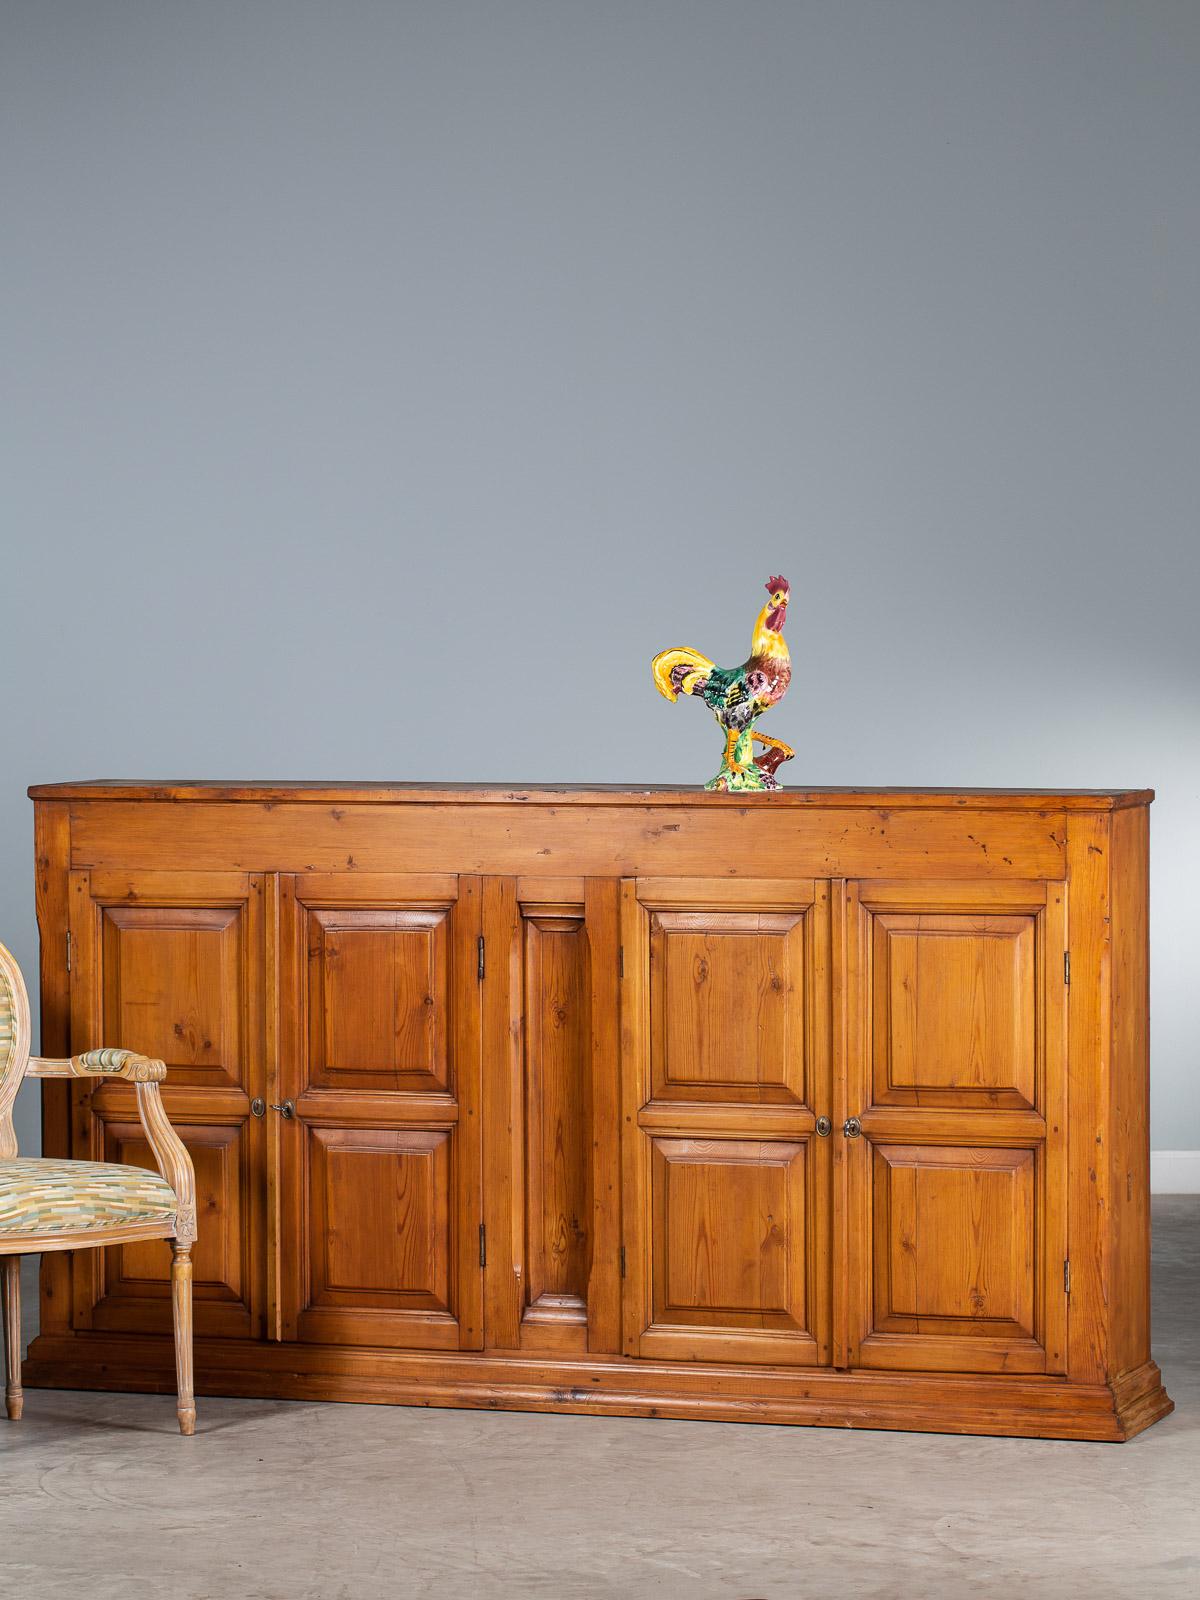 This vintage French solid pine buffet credenza cabinet circa 1930 features four cabinet doors made of deeply recessed panels and molding. Heavy and substantial this piece was originally a shop fitting for a retail establishment for the storage of